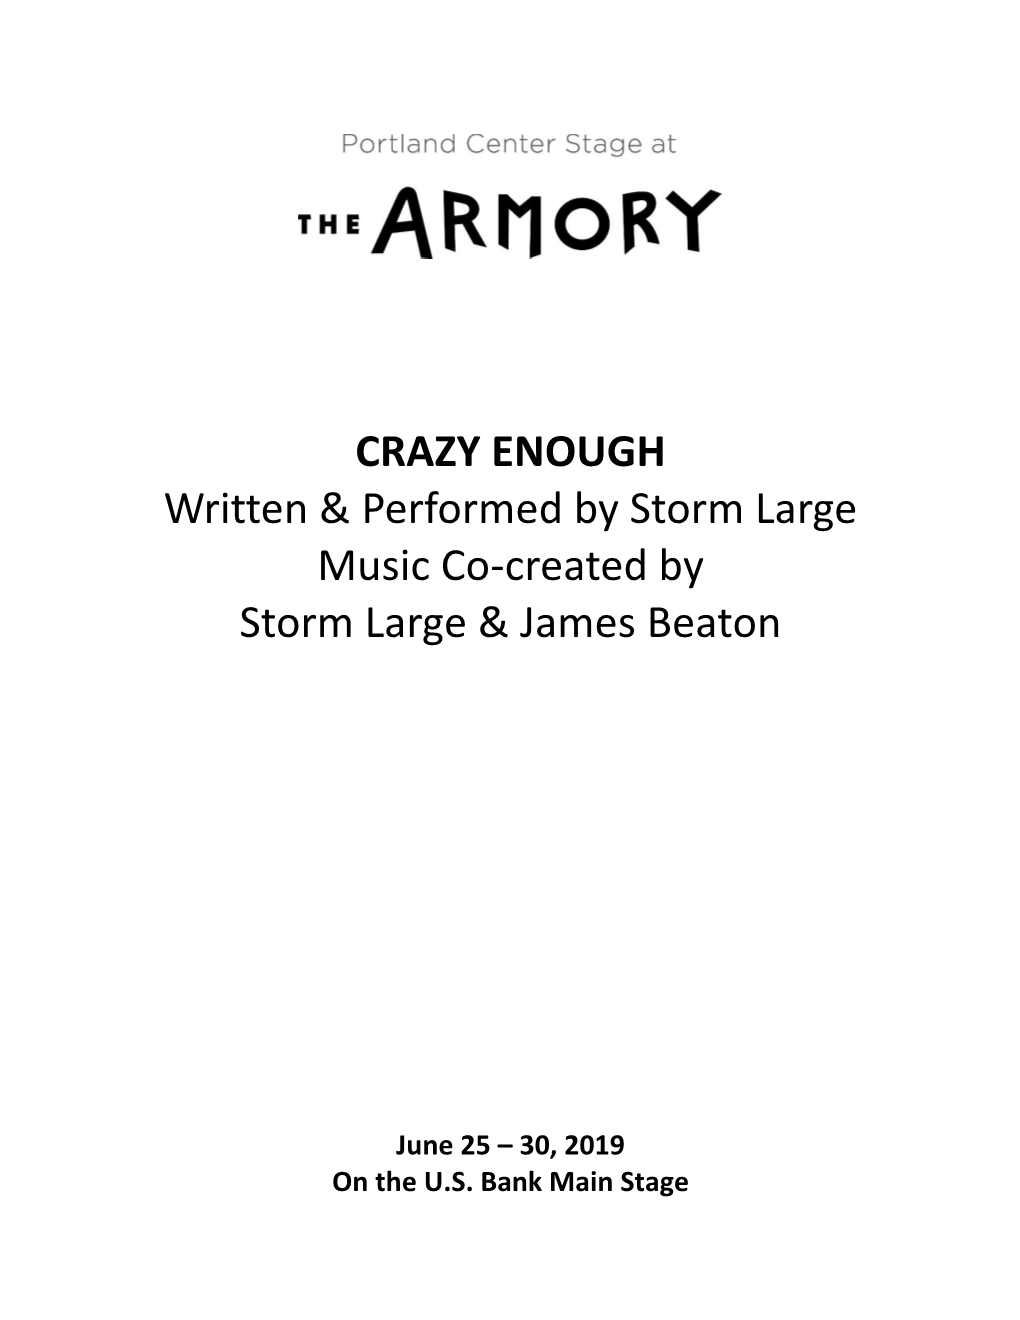 CRAZY ENOUGH Written & Performed by Storm Large Music Co-Created by Storm Large & James Beaton